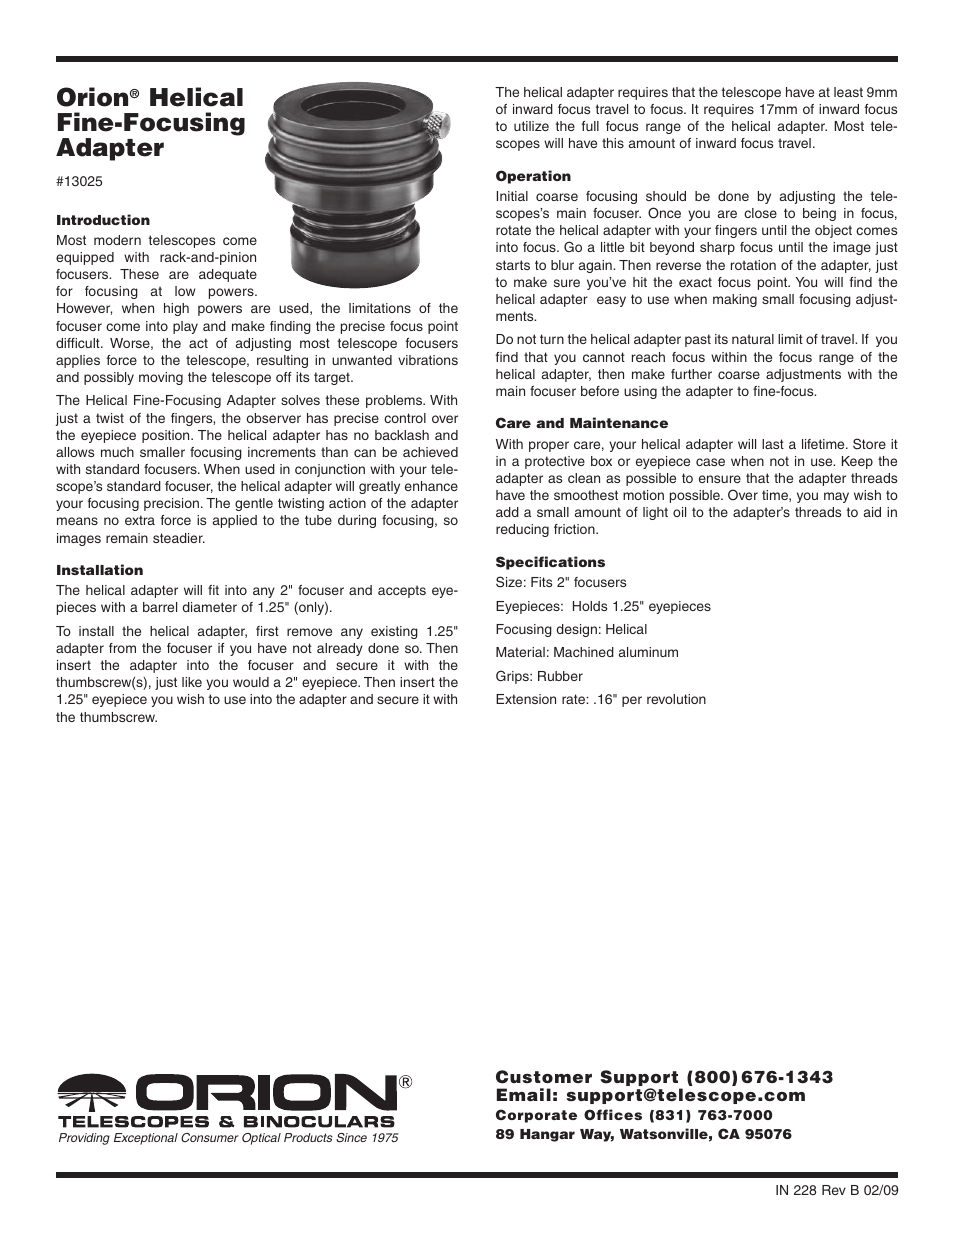 Orion HELICAL FINE-FOCUSING ADAPTER 13025 User Manual | 1 page